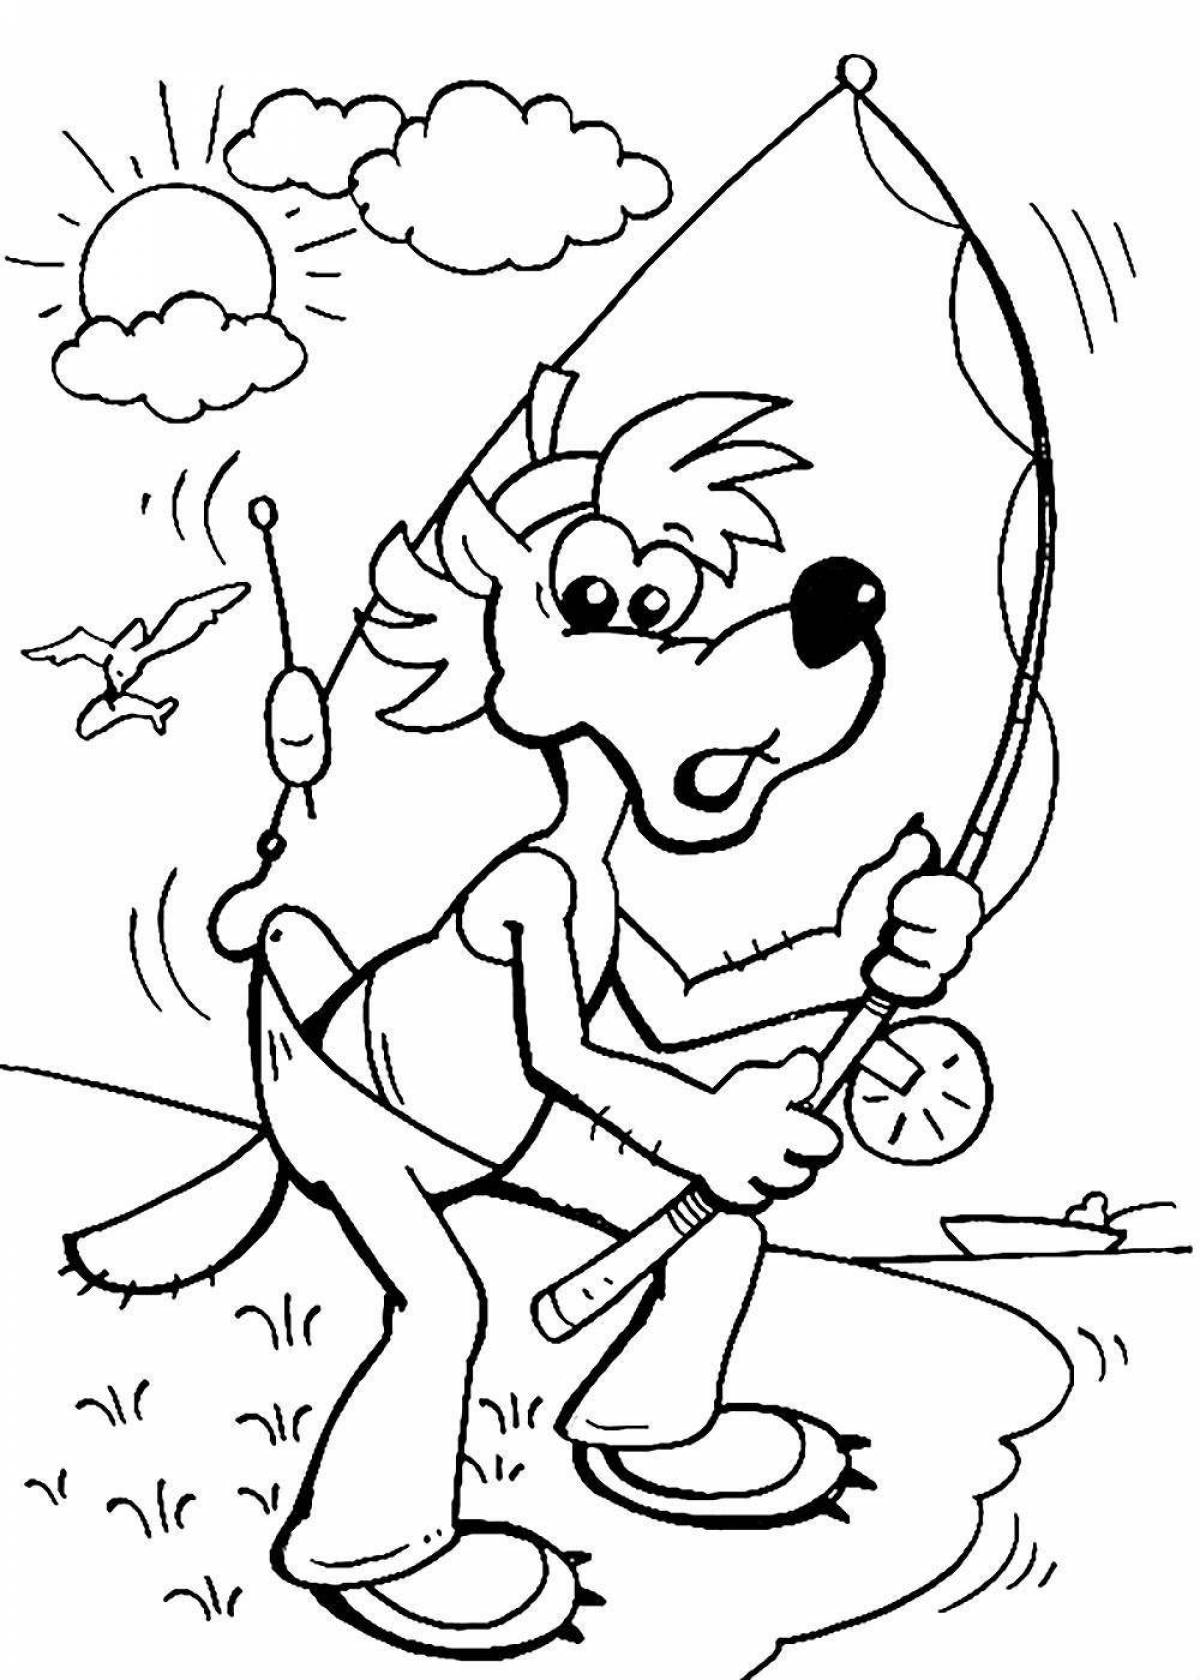 Color-lush coloring page ok for kids